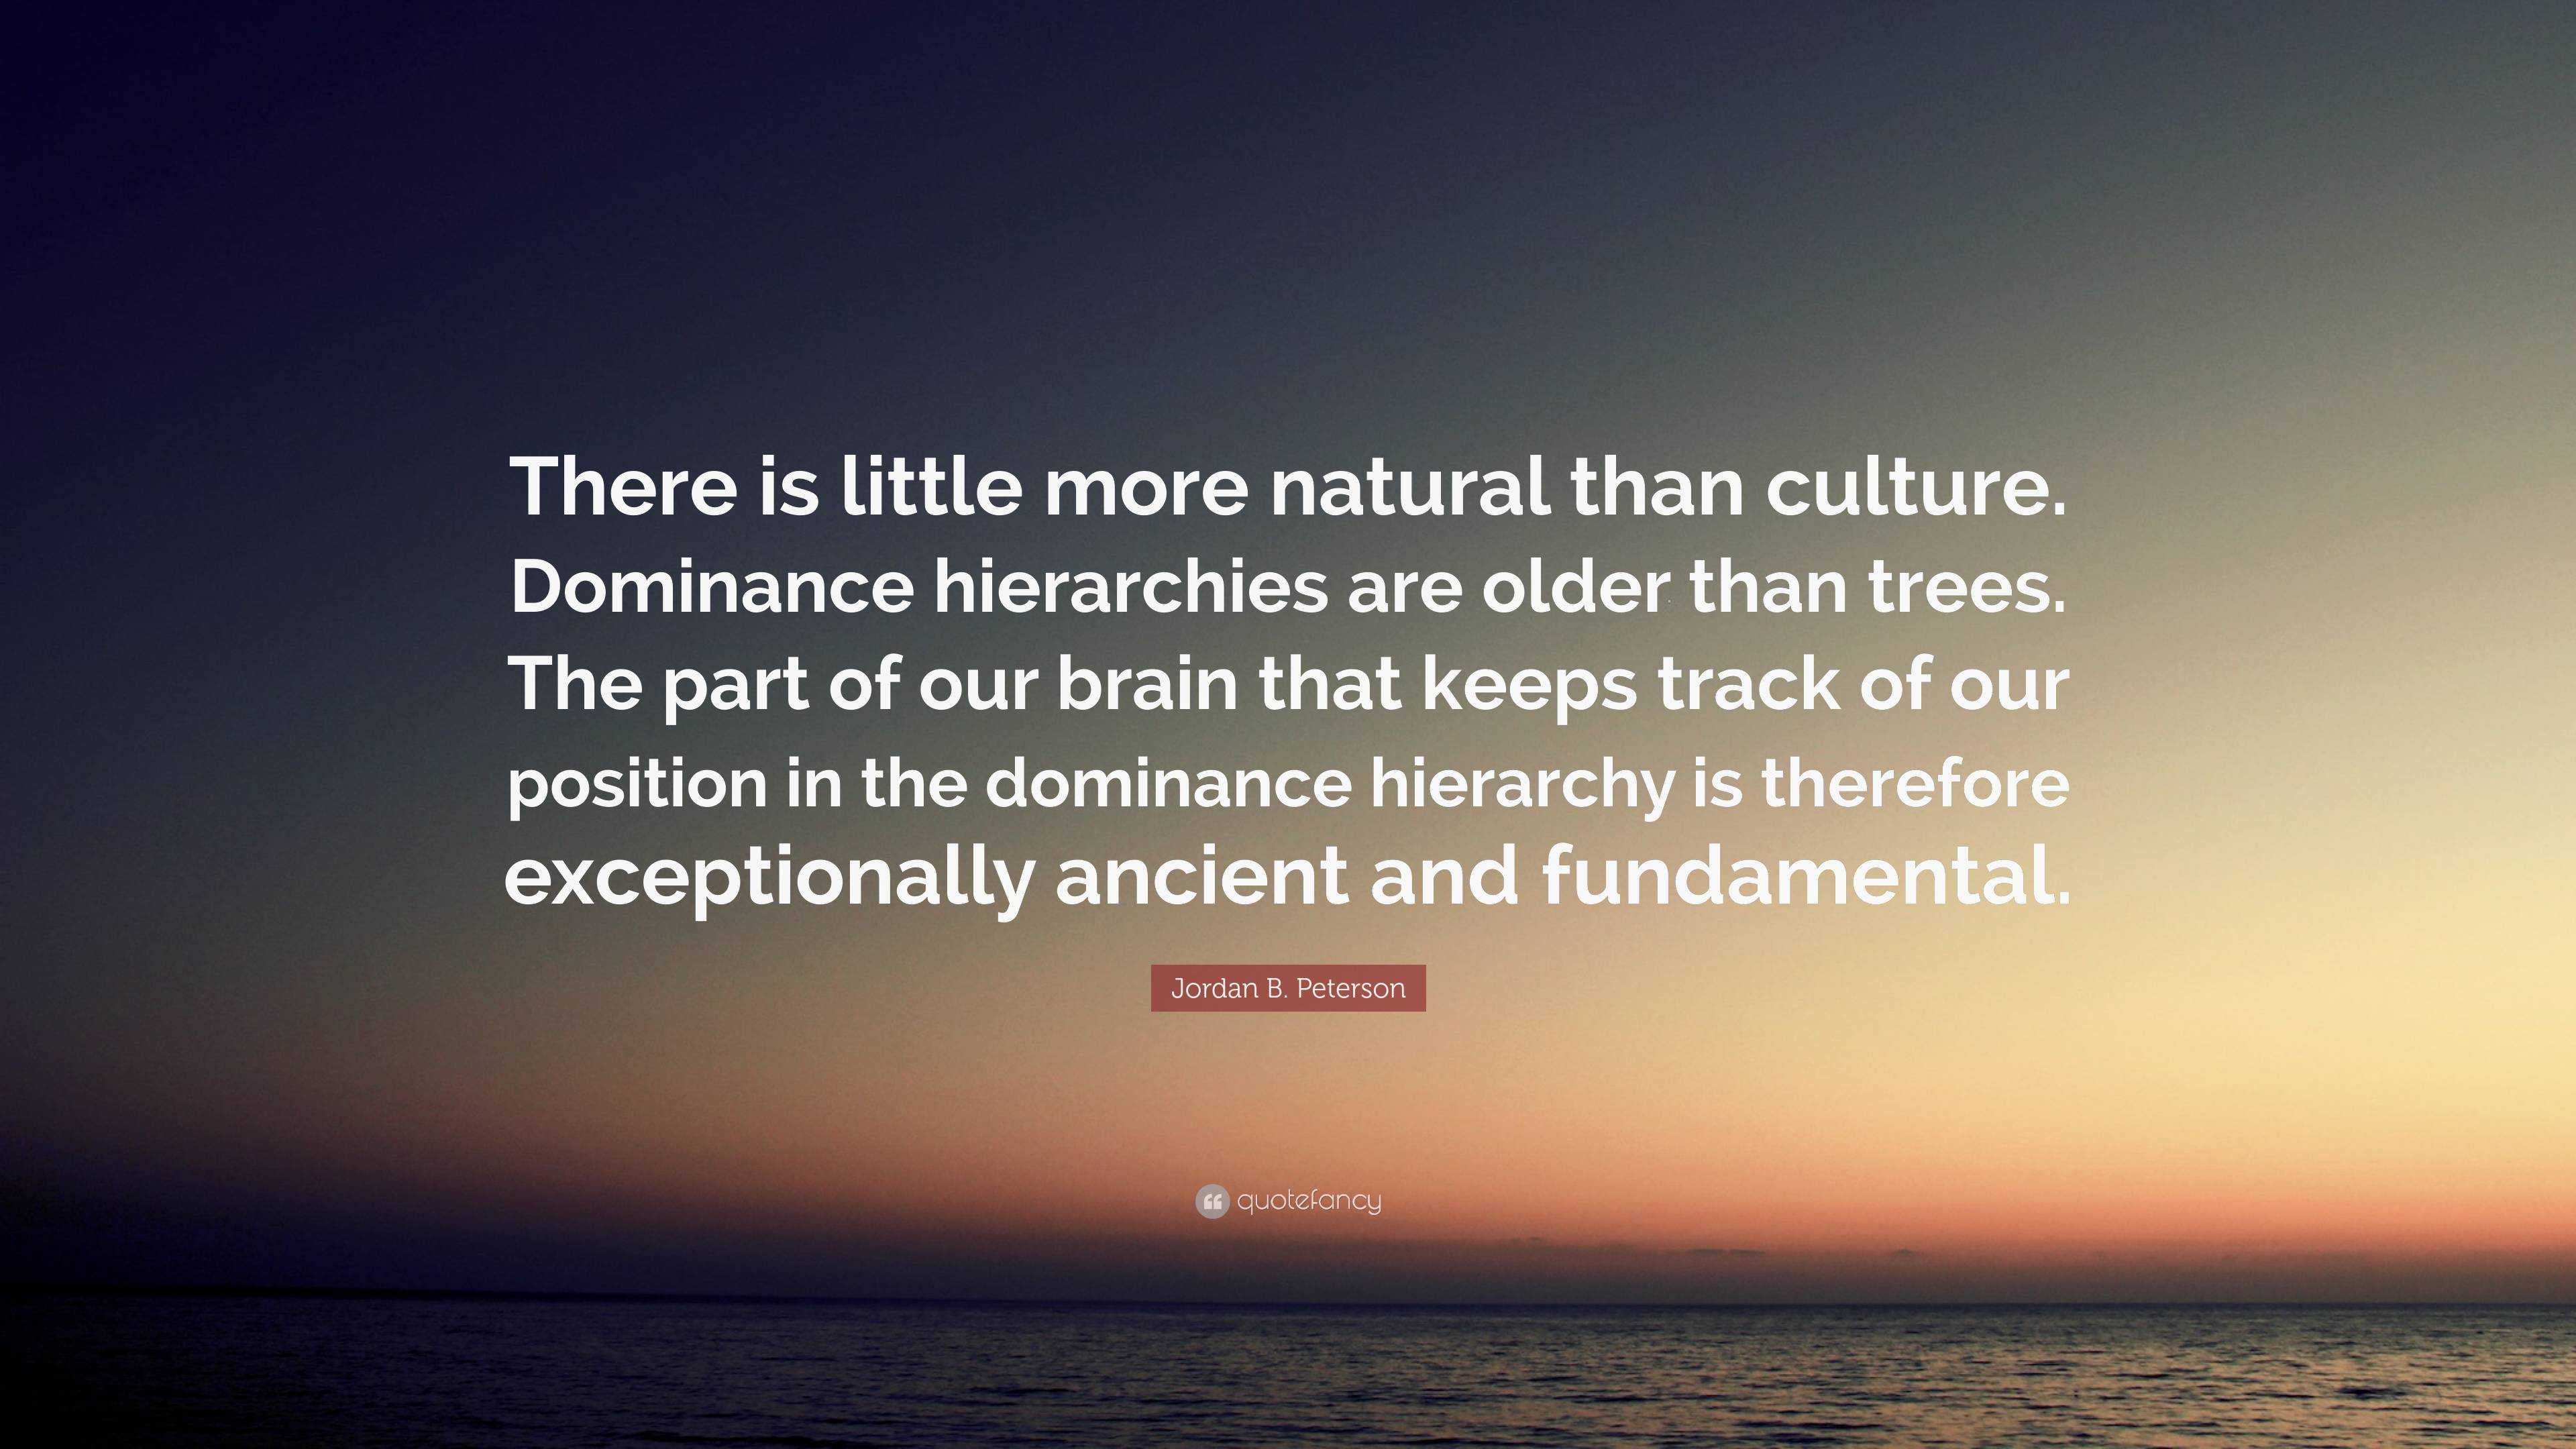 Jordan B. Peterson Quote: “There is little more natural than culture. Dominance hierarchies are older than trees. part of our brain that keeps ...”